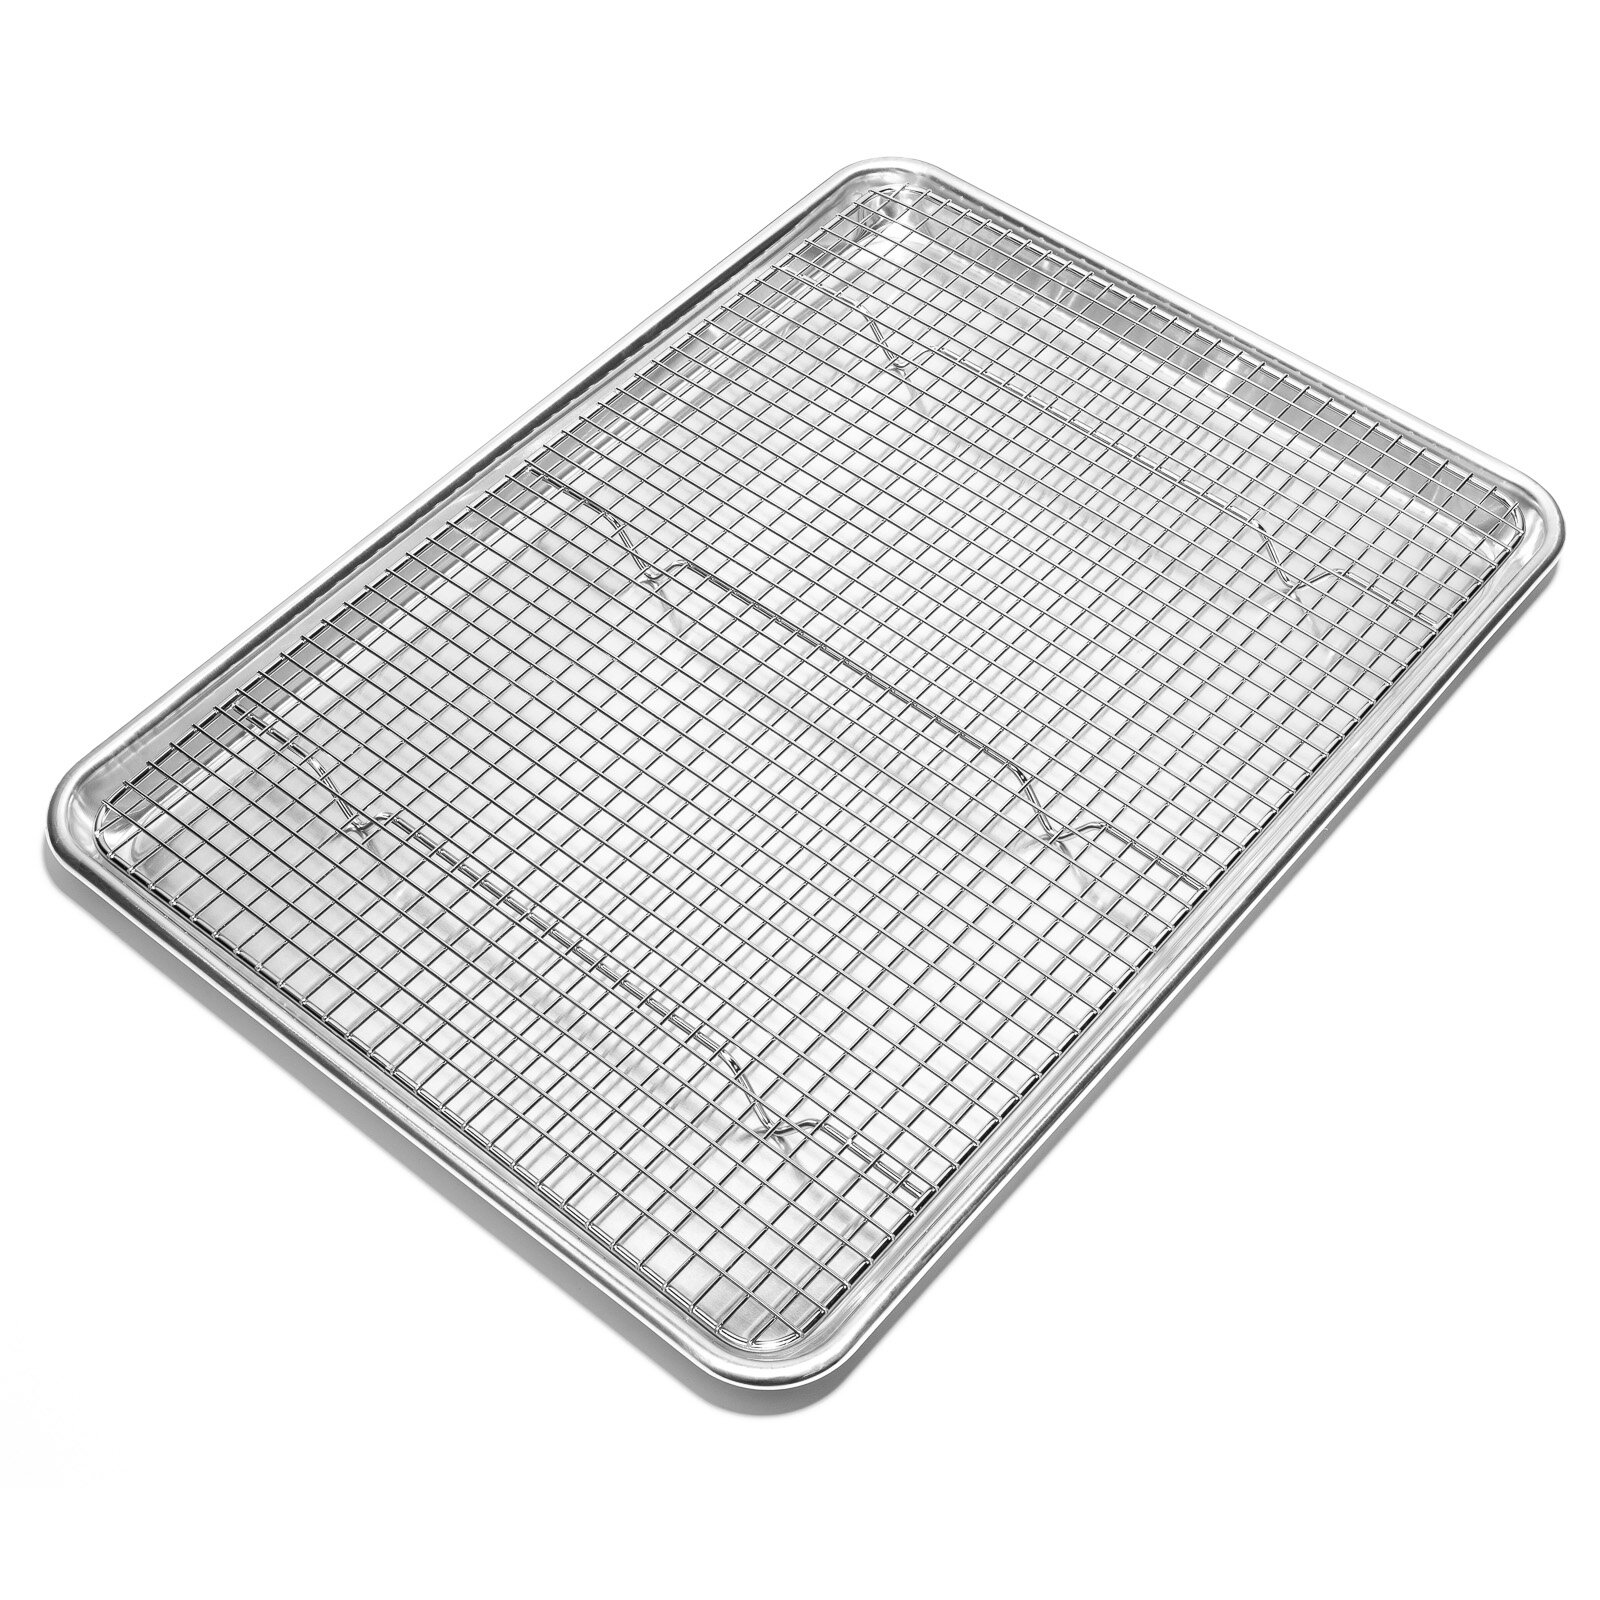 Cooling Racks, Nonstick Wire Baking Rack with Handle Fit Half